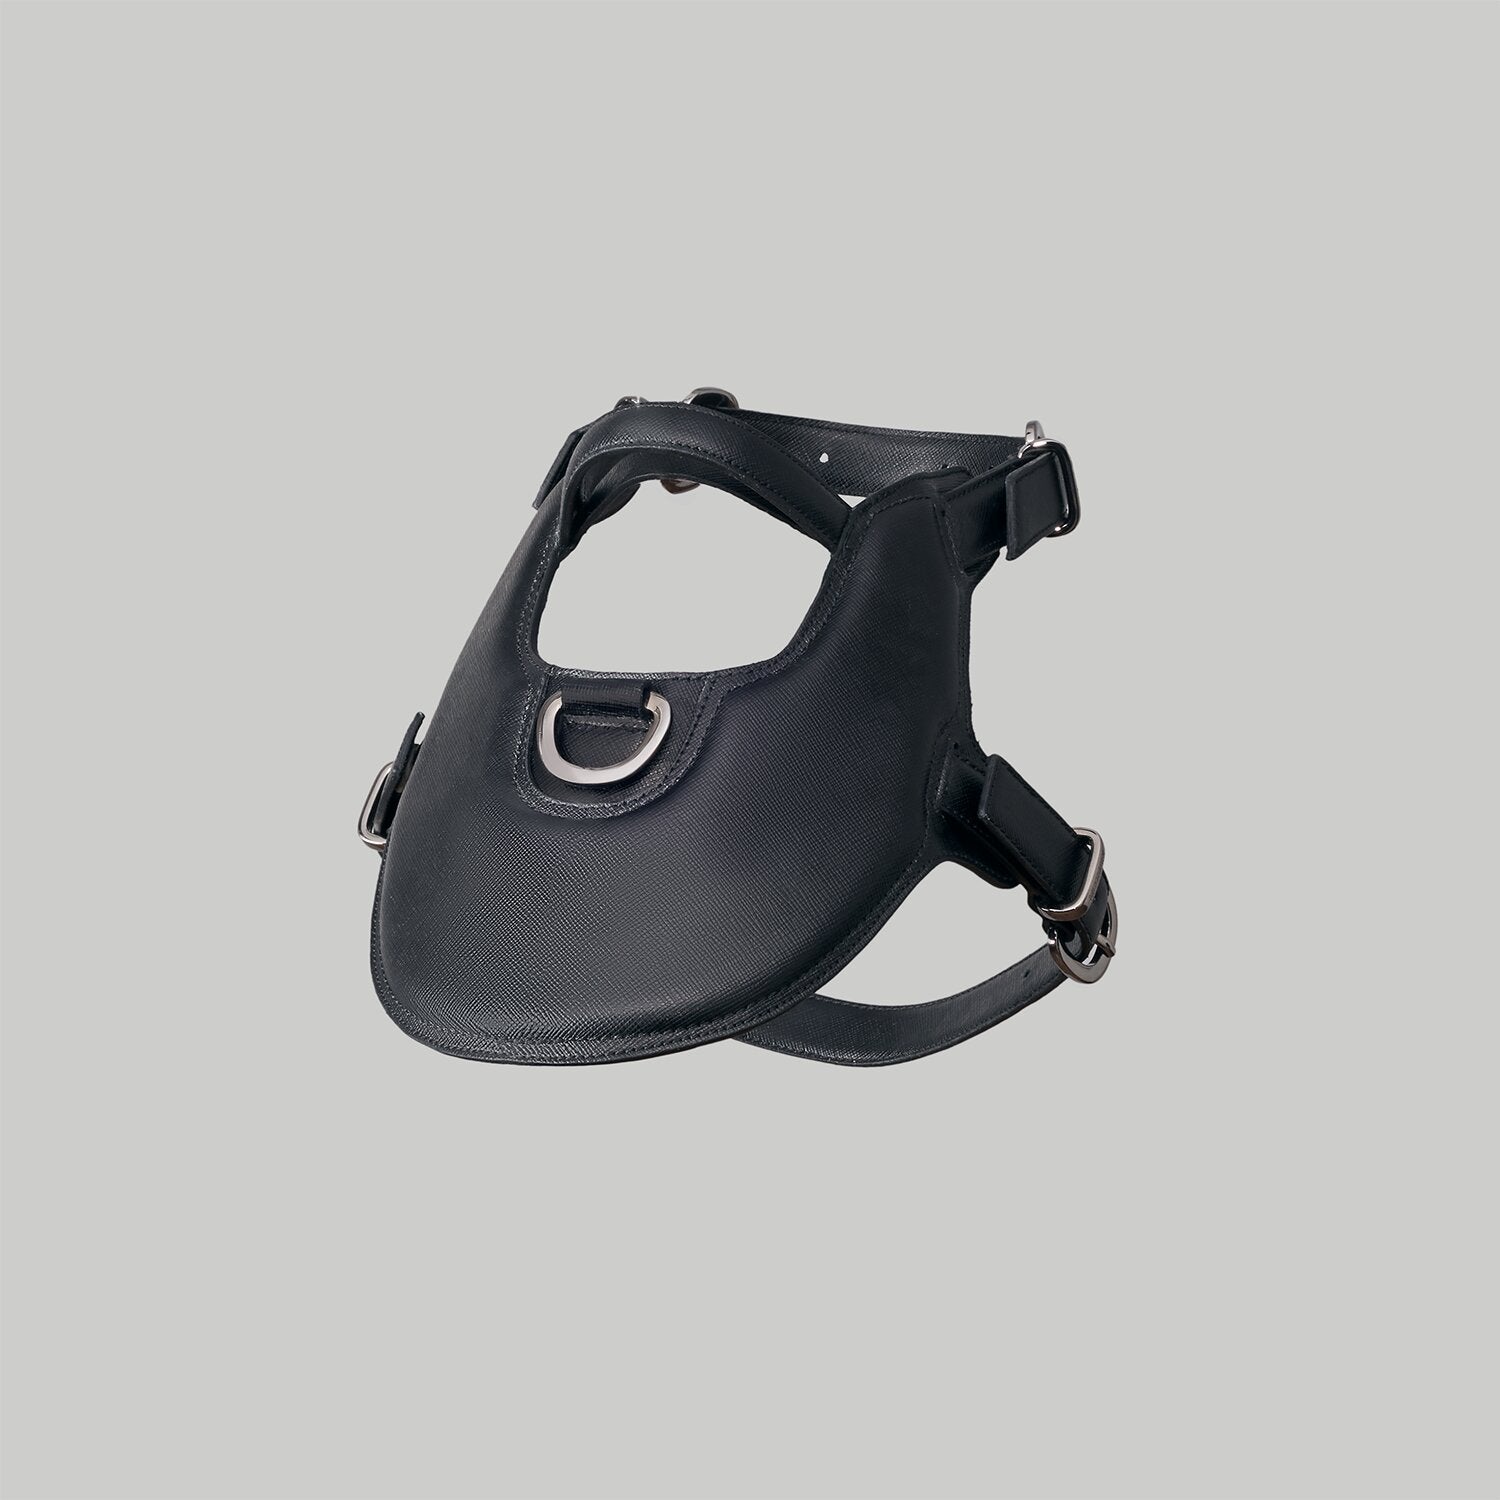 Dog harness in black Saffiano leather with Ruthenium